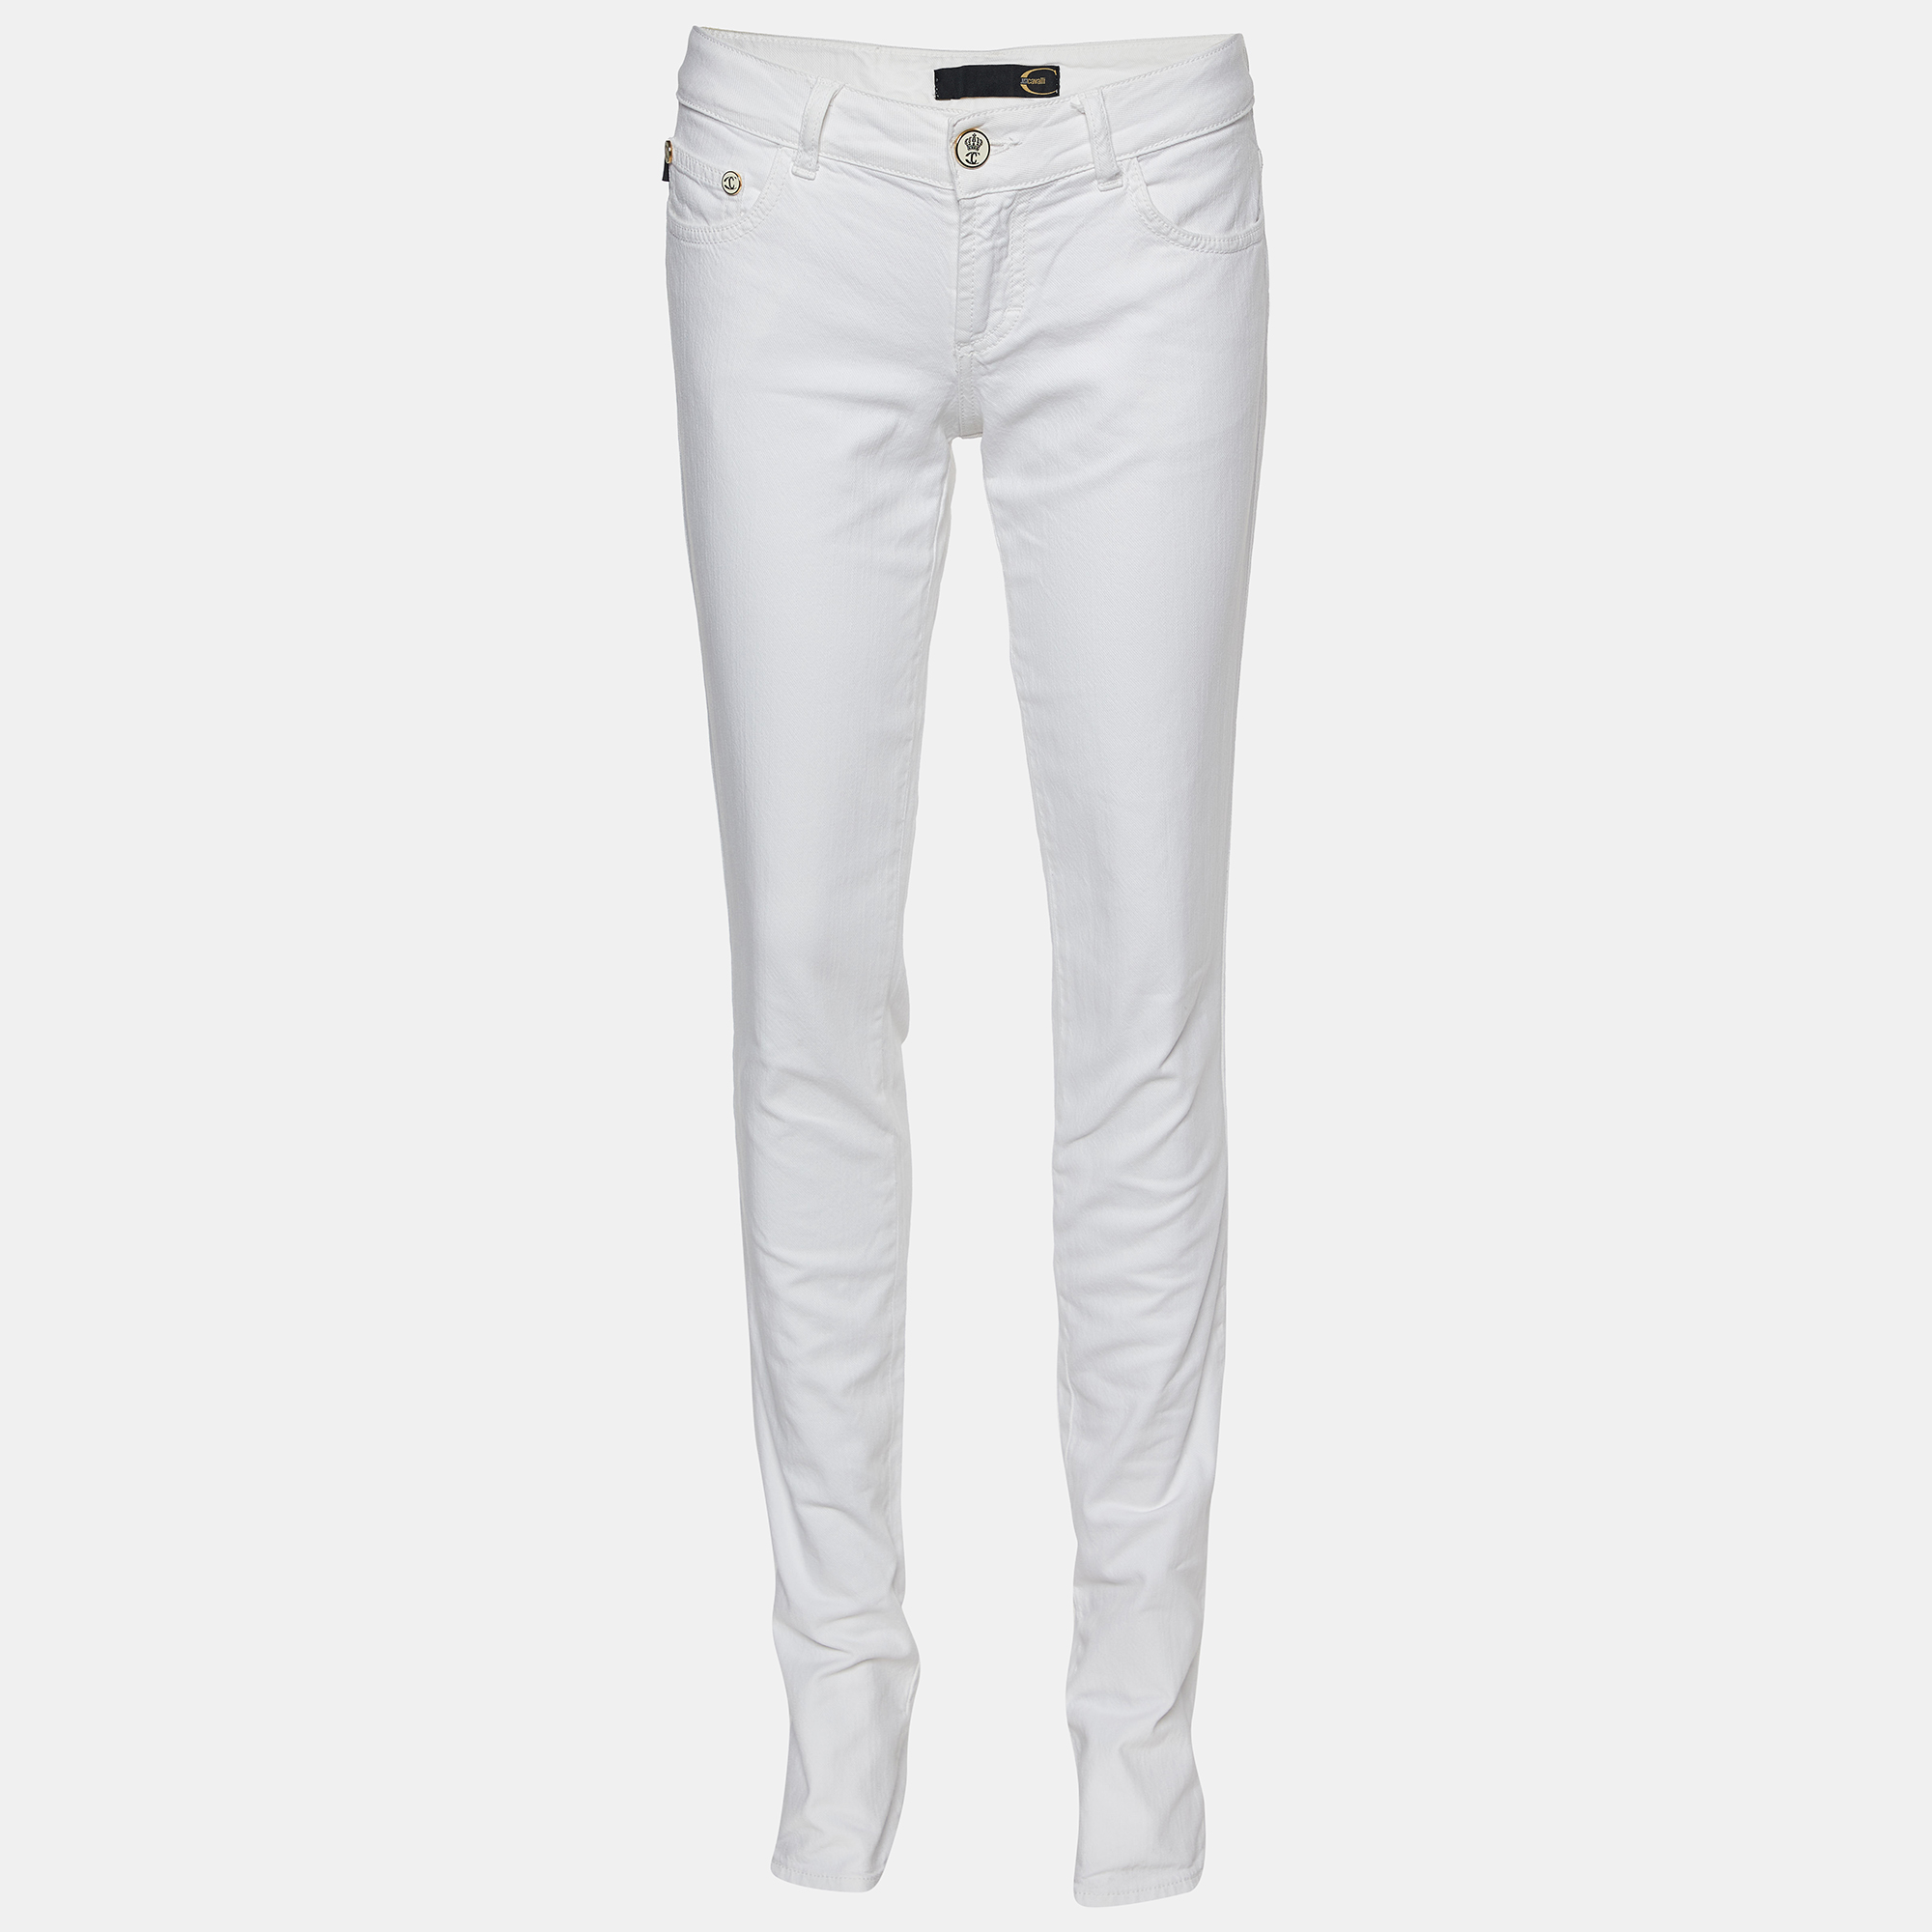 Pre-owned Just Cavalli White Denim Embroidered Pocket Detail Jeans S Waist: 30.5"